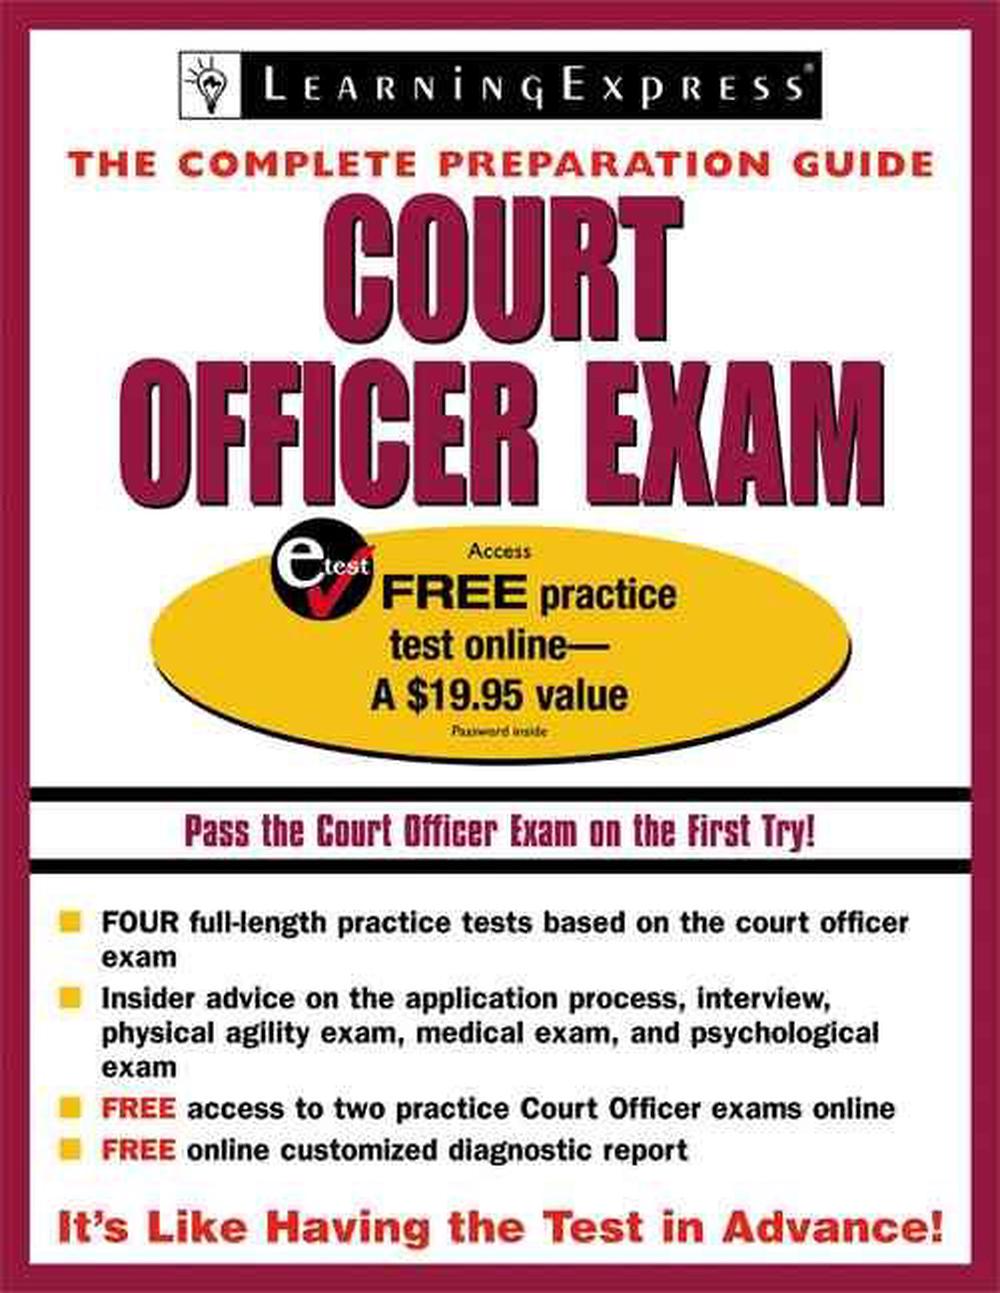 Court Officer Exam The Complete Preparation Guide [With Free Practice